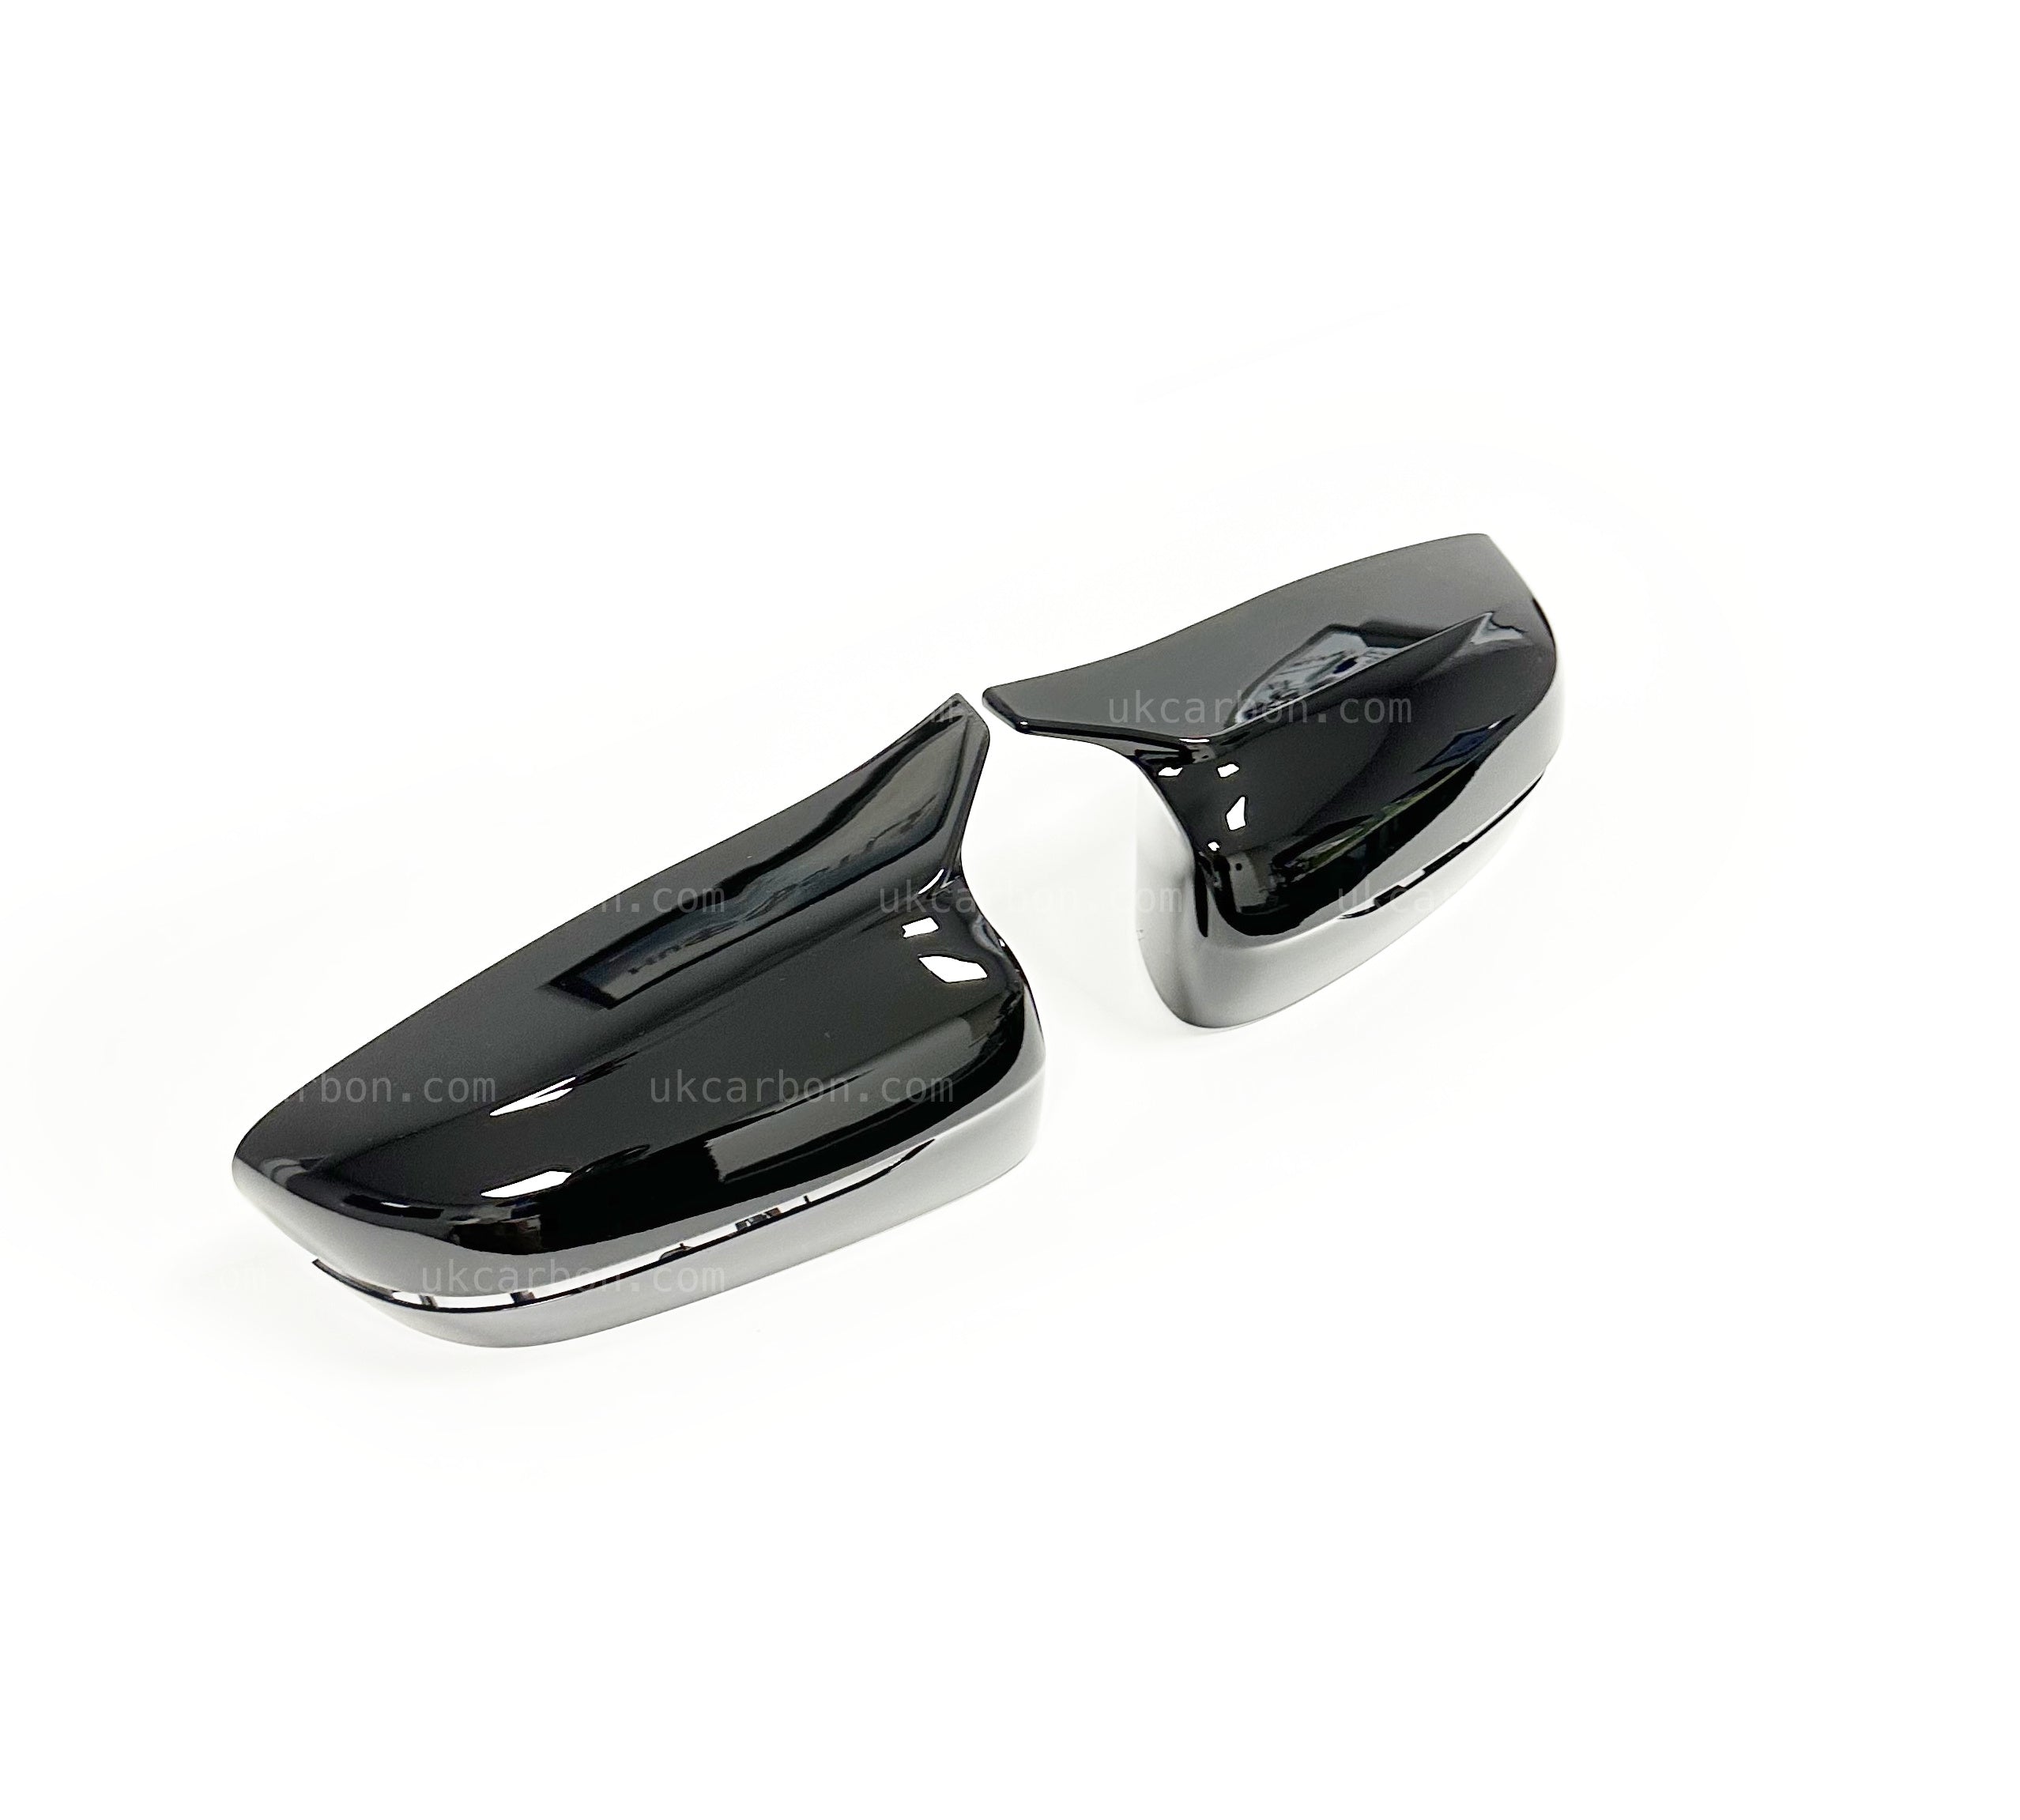 BMW 5 Series Gloss Black M Style Wing Mirror Cover Replacements G30 by UKCarbon